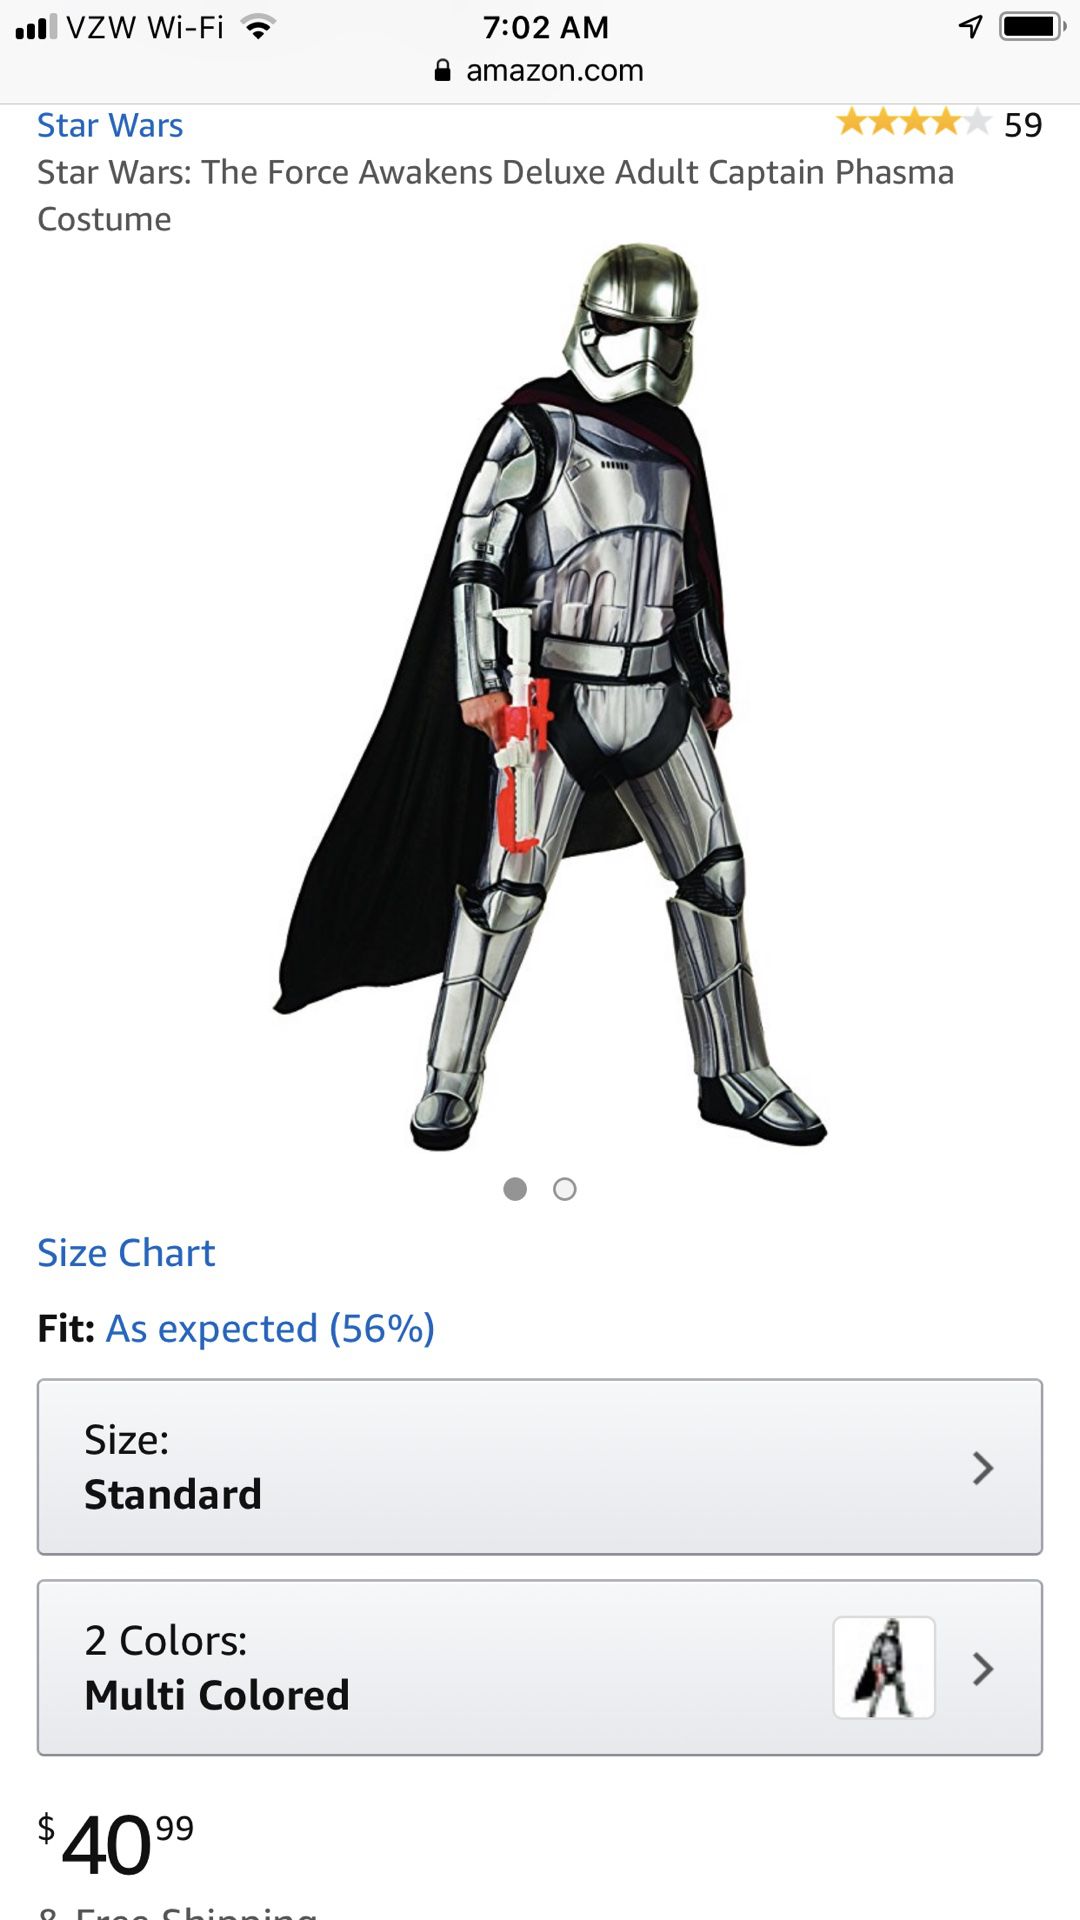 Star Wars: The Force Awakens Deluxe Adult Captain Phasma Costume